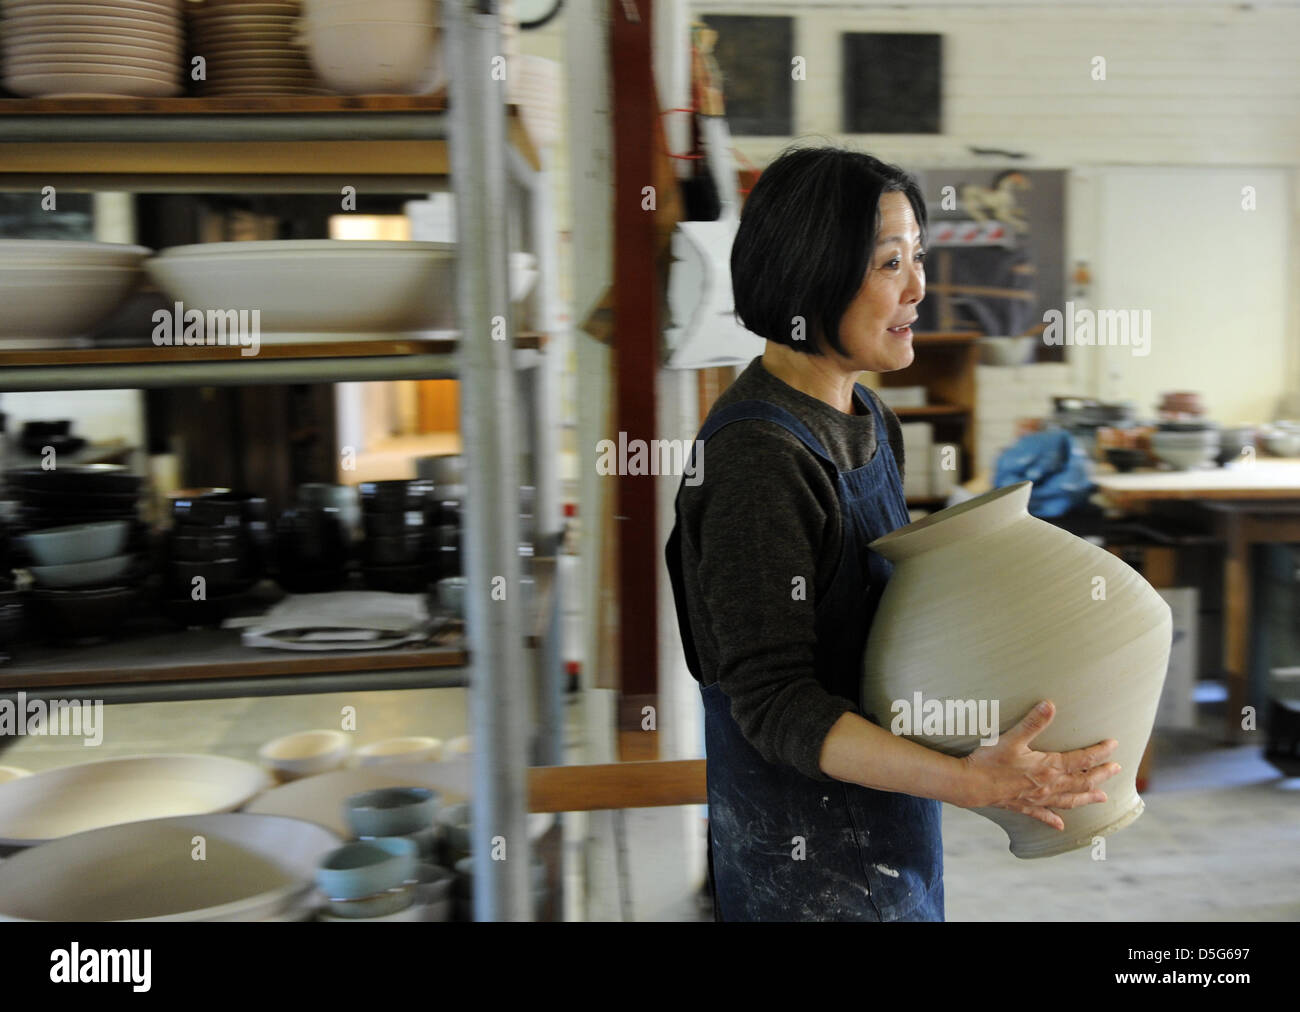 The Manager Of The Ceramic Studio Margaretenhohe Young Jae Lee Works In The Atelier In Essen Germany 27 March 2013 Together With Six Colleagues She Produces Vases Bowls And Tea Pots Made Of